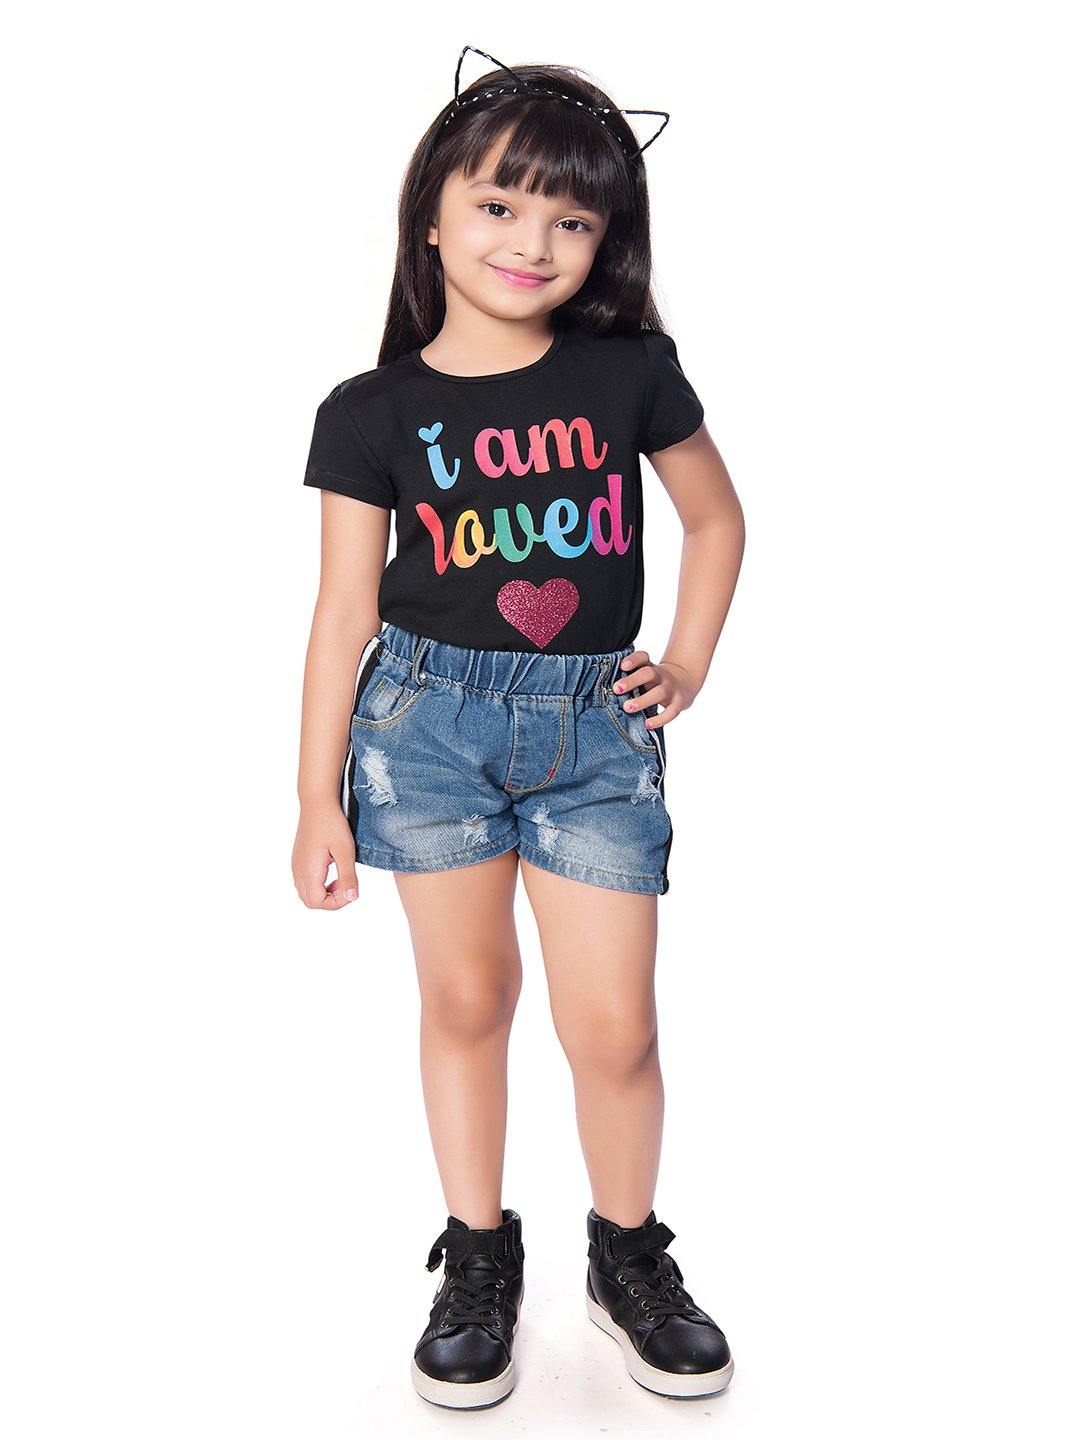 Tiny Baby Black Colored Top - T-112 Black - TINY BABY INDIA shop.tinybaby.in